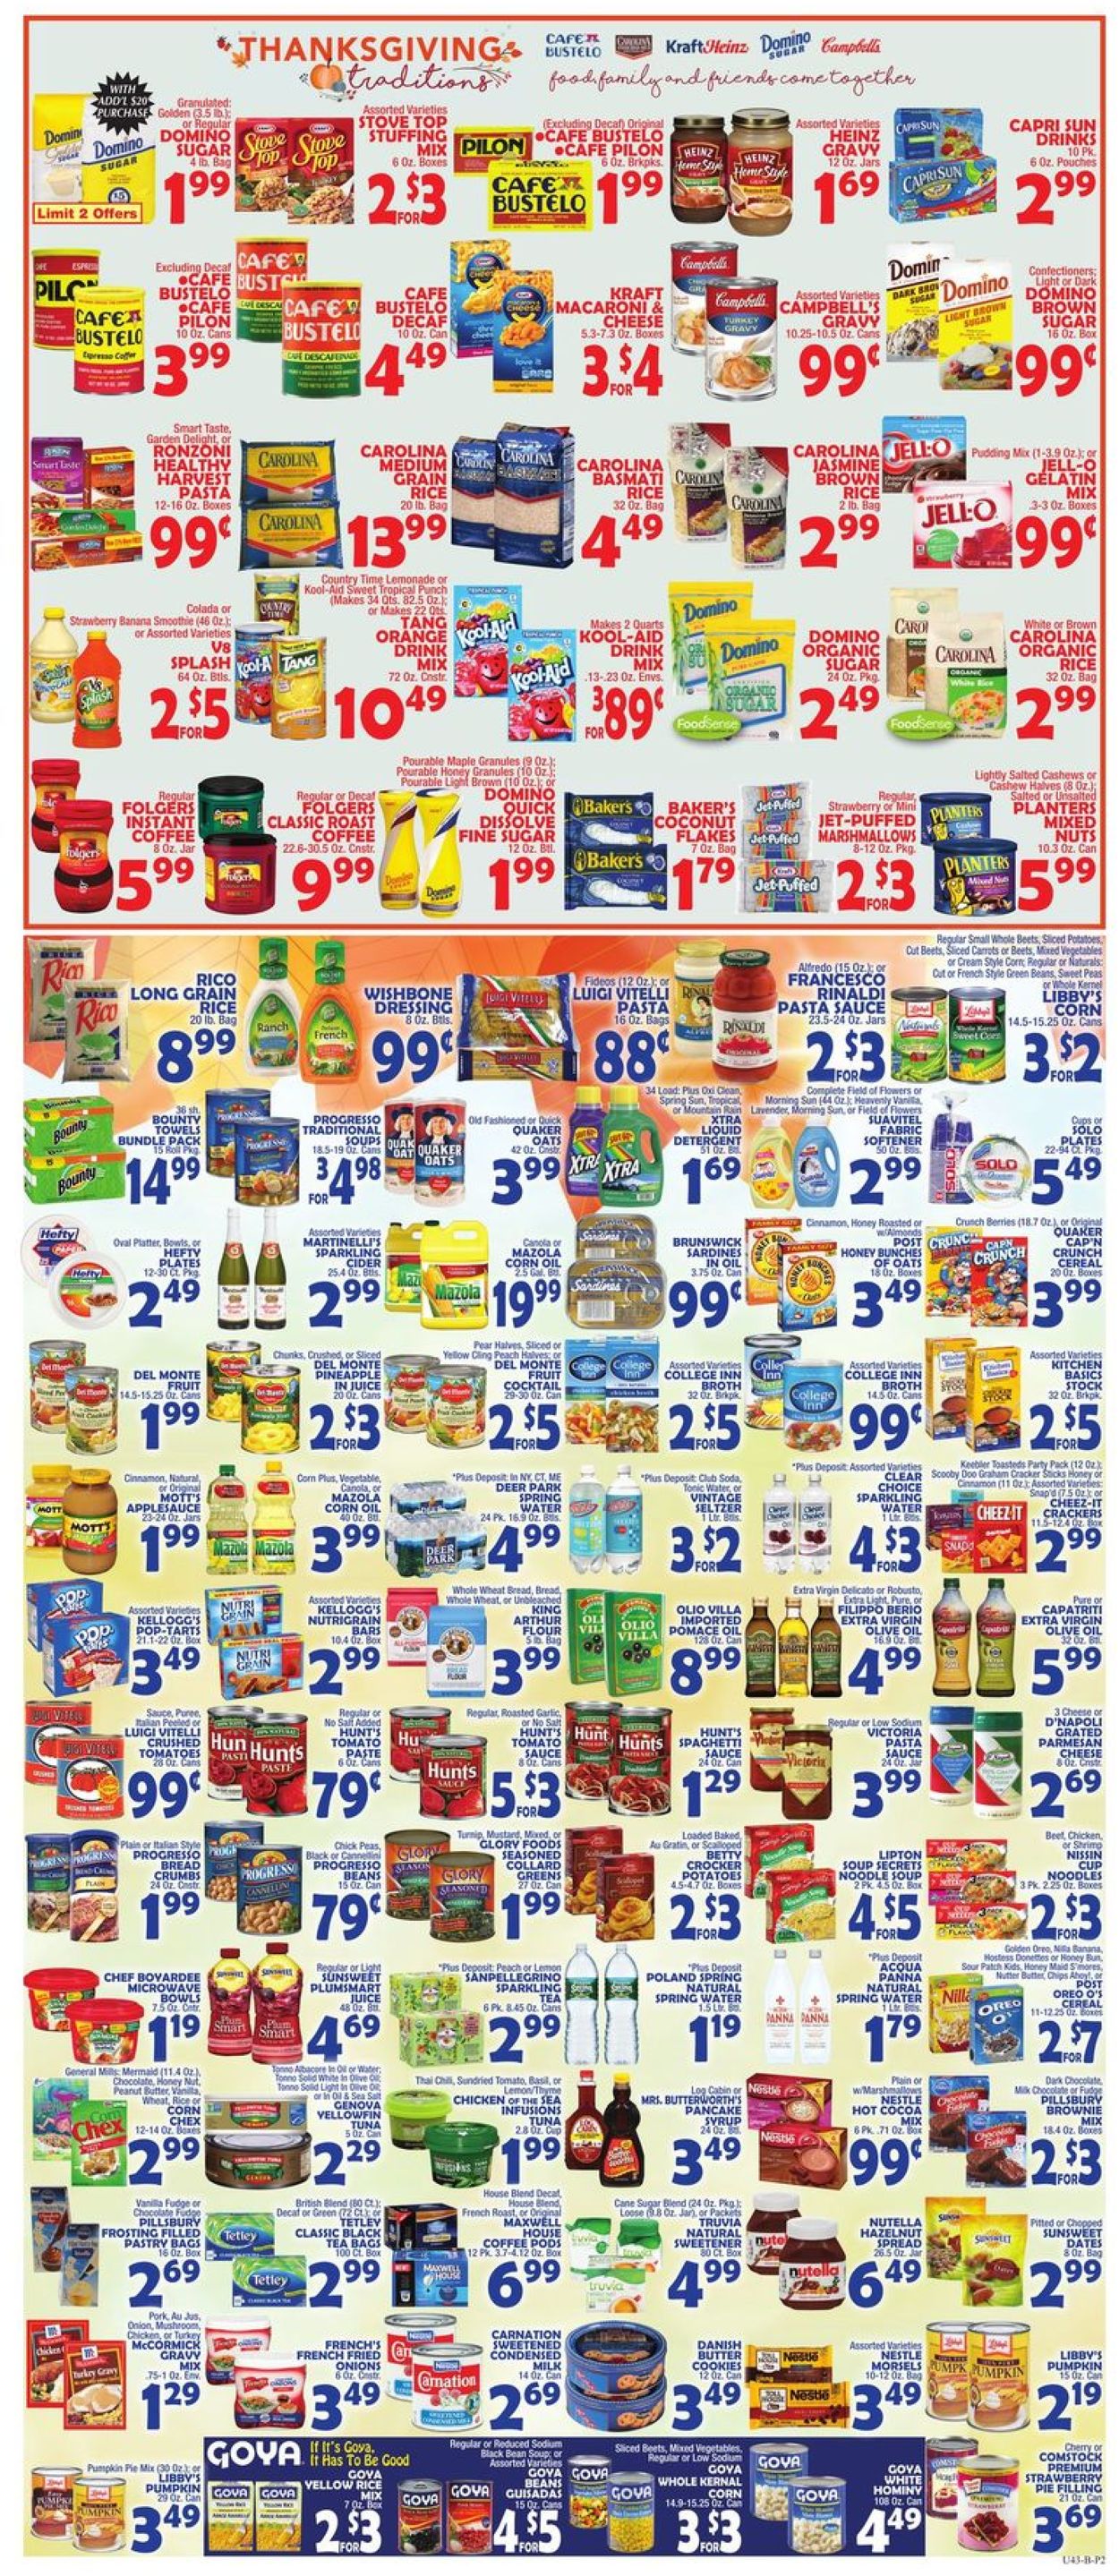 Catalogue Bravo Supermarkets - Thanksgiving Ad 2019 from 11/15/2019